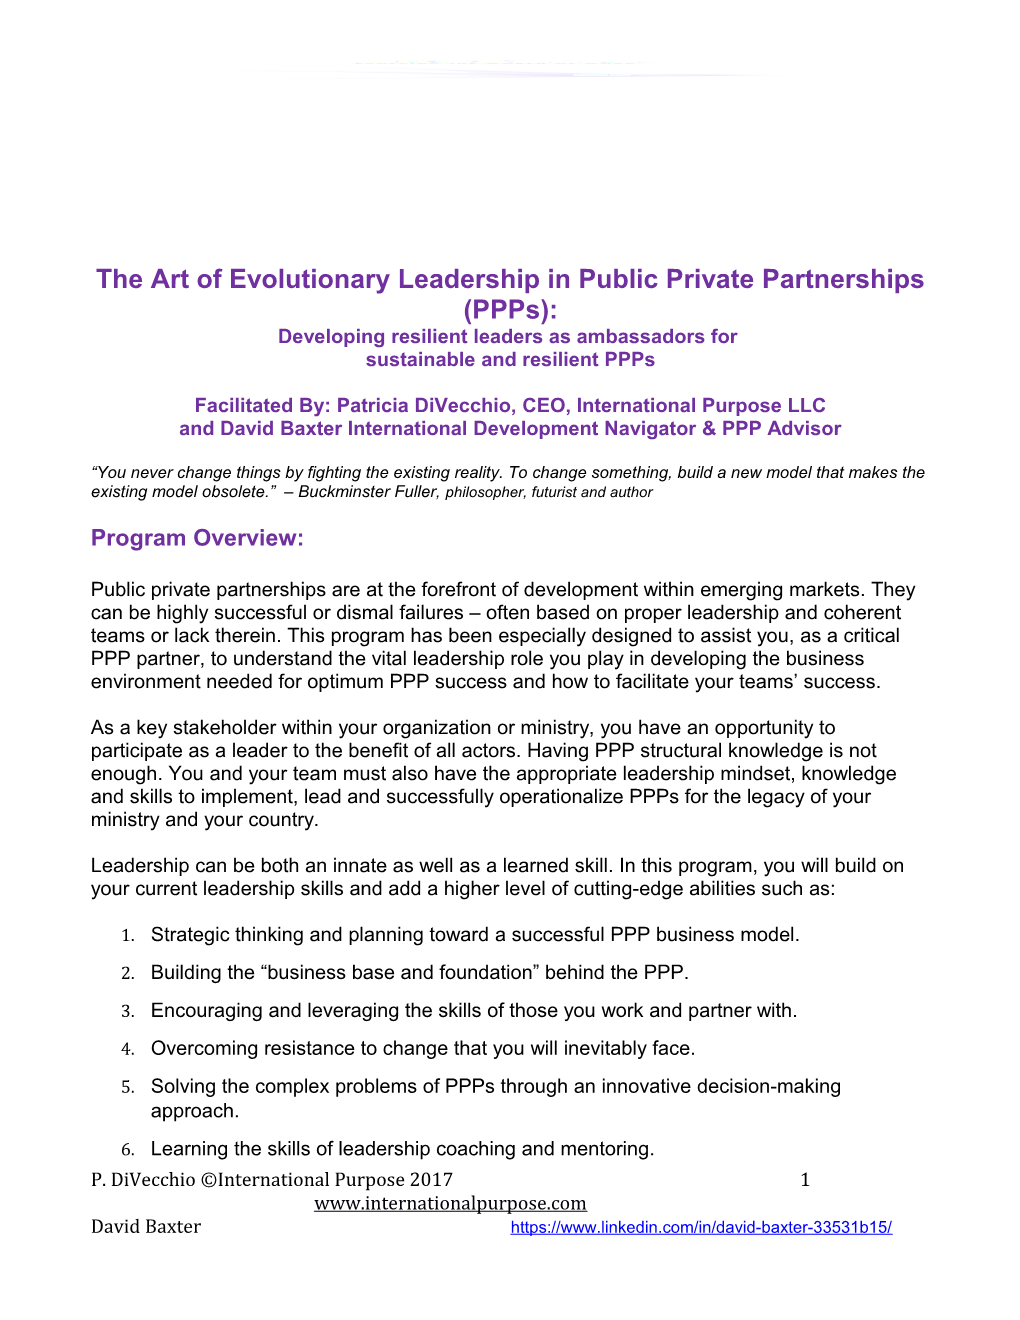 The Art of Evolutionary Leadership in Publicprivate Partnerships (Ppps)